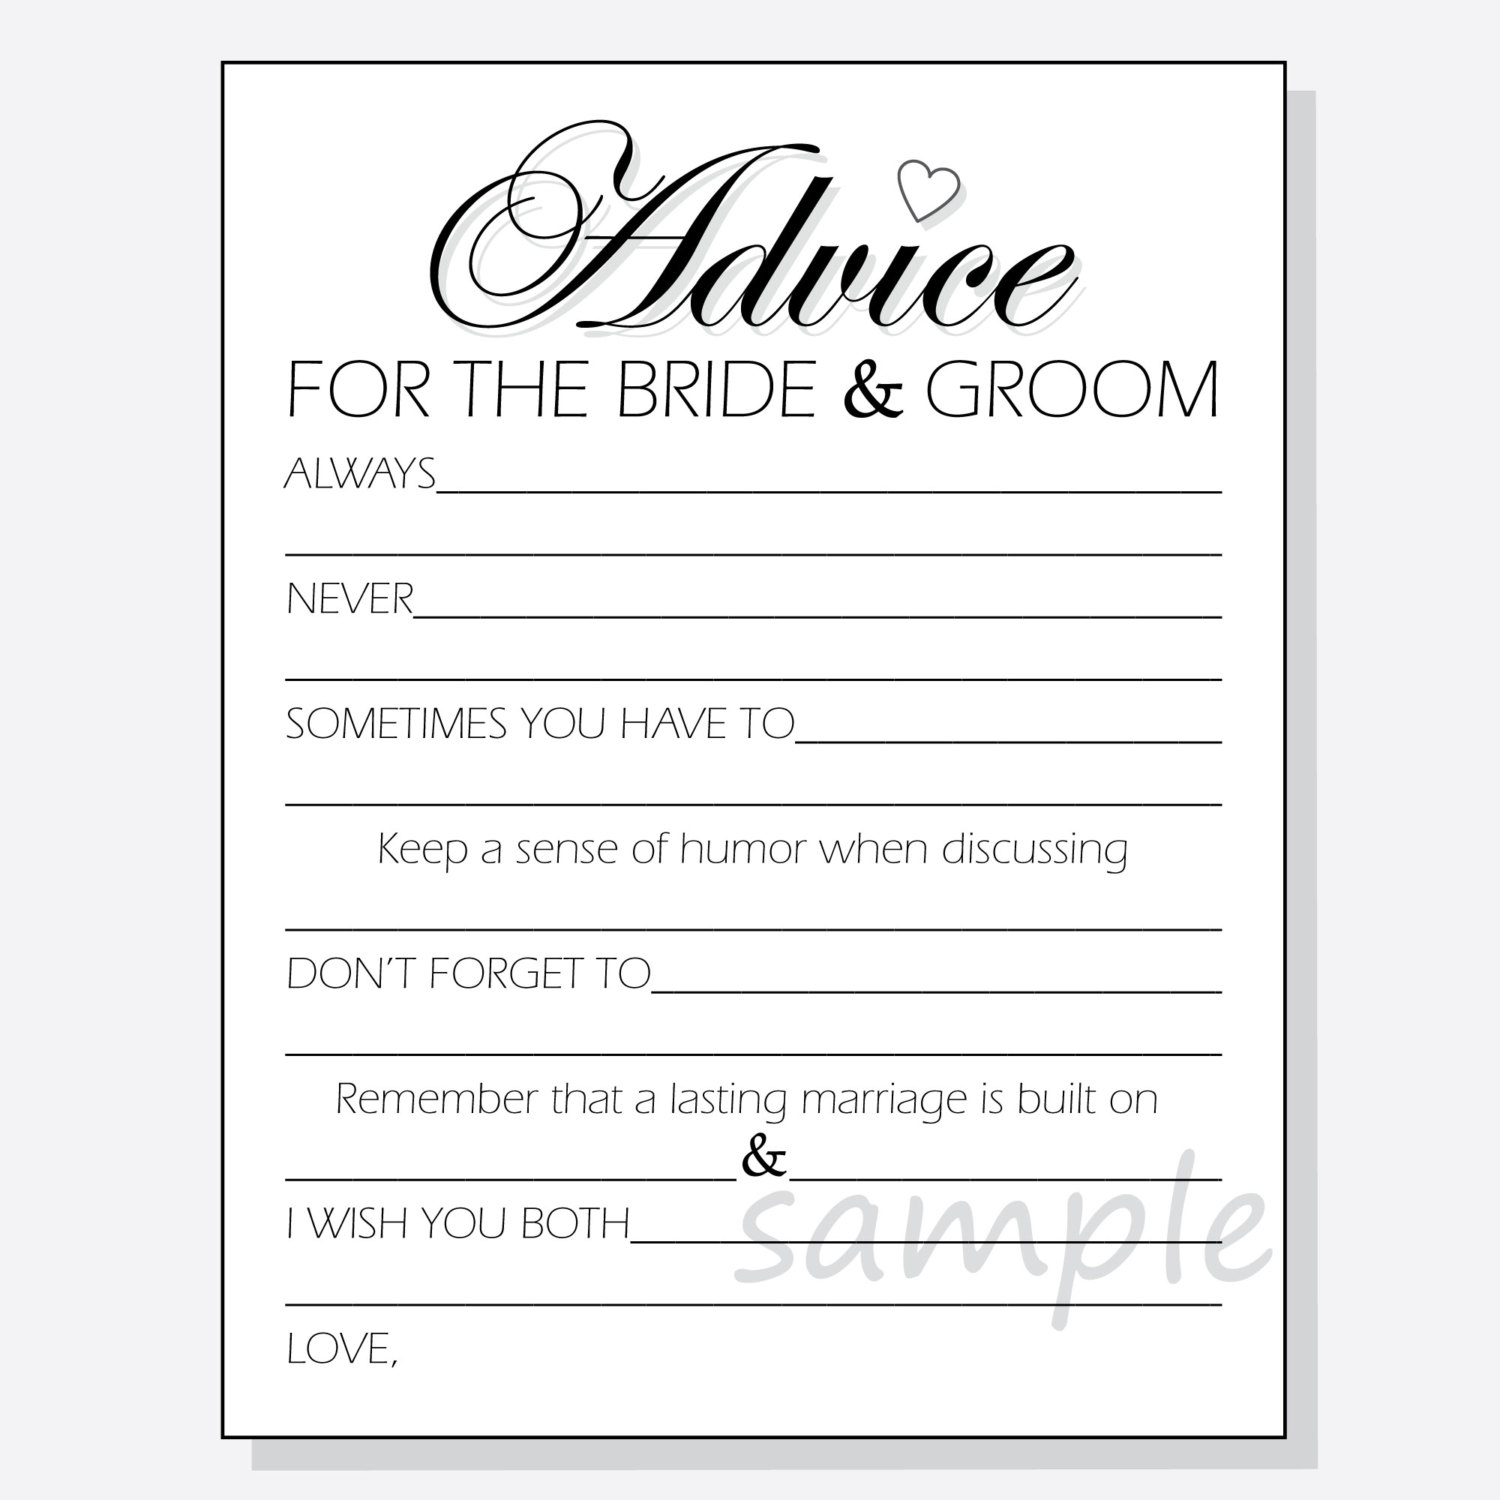 Diy Advice For The Bride &amp;amp; Groom Printable Cards For A Shower | Etsy - Free Printable Bridal Shower Advice Cards